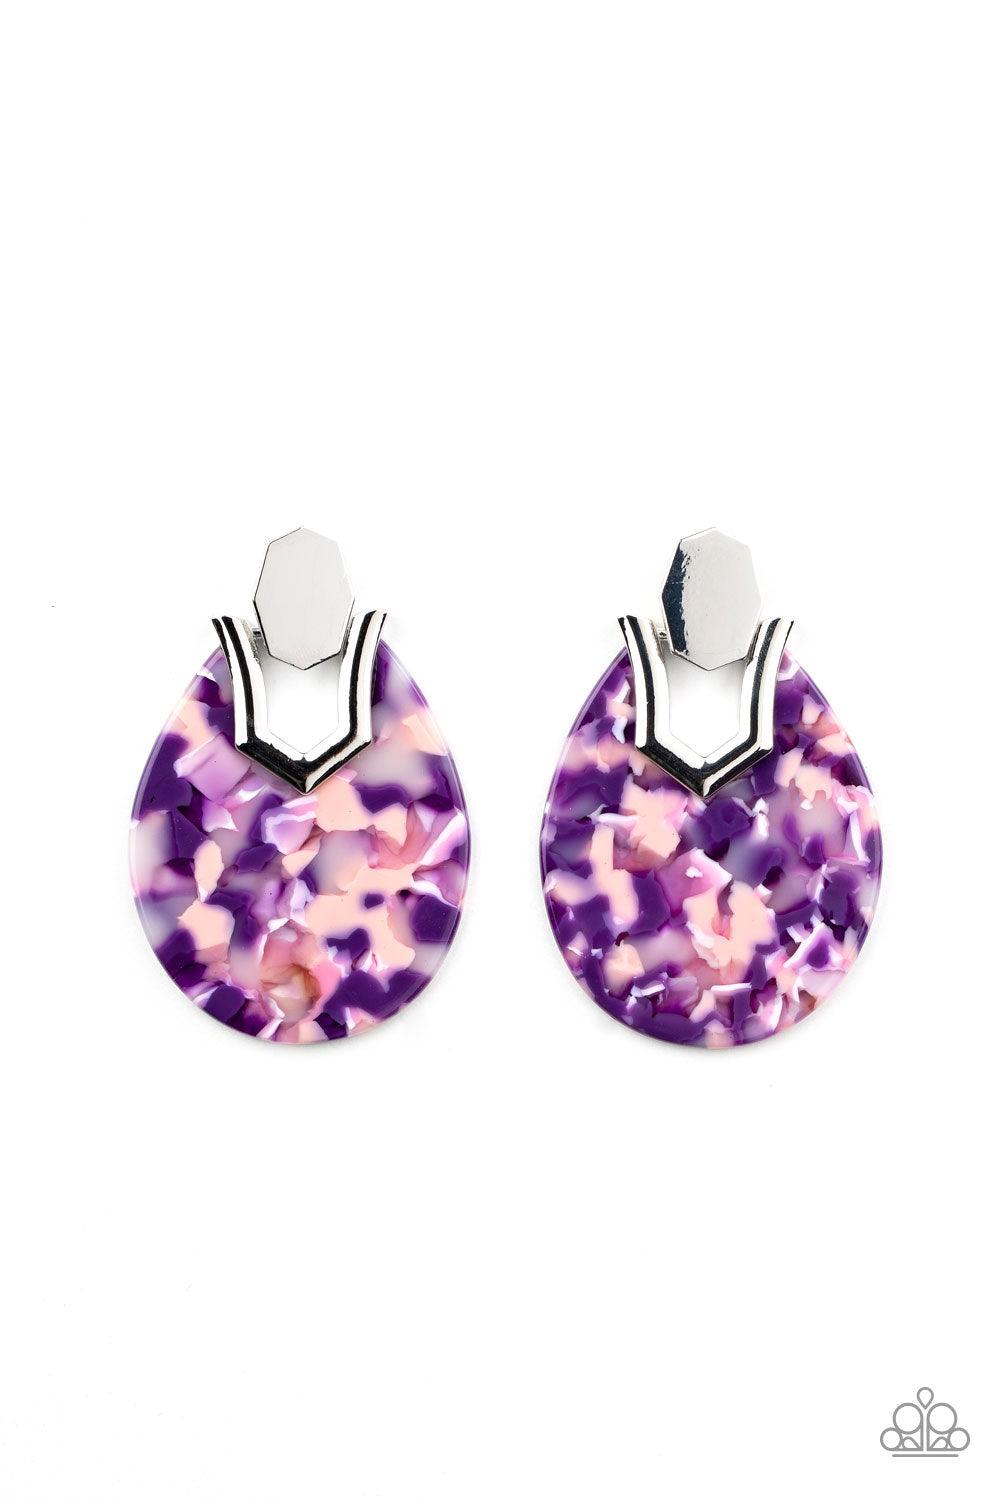 Paparazzi Accessories HAUTE Flash - Purple Speckled in a colorful purple and pink tortoise shell-like pattern, a teardrop acrylic frame fastens to a shiny silver fitting for a trendy retro look. Earring attaches to a standard post fitting. Sold as one pai